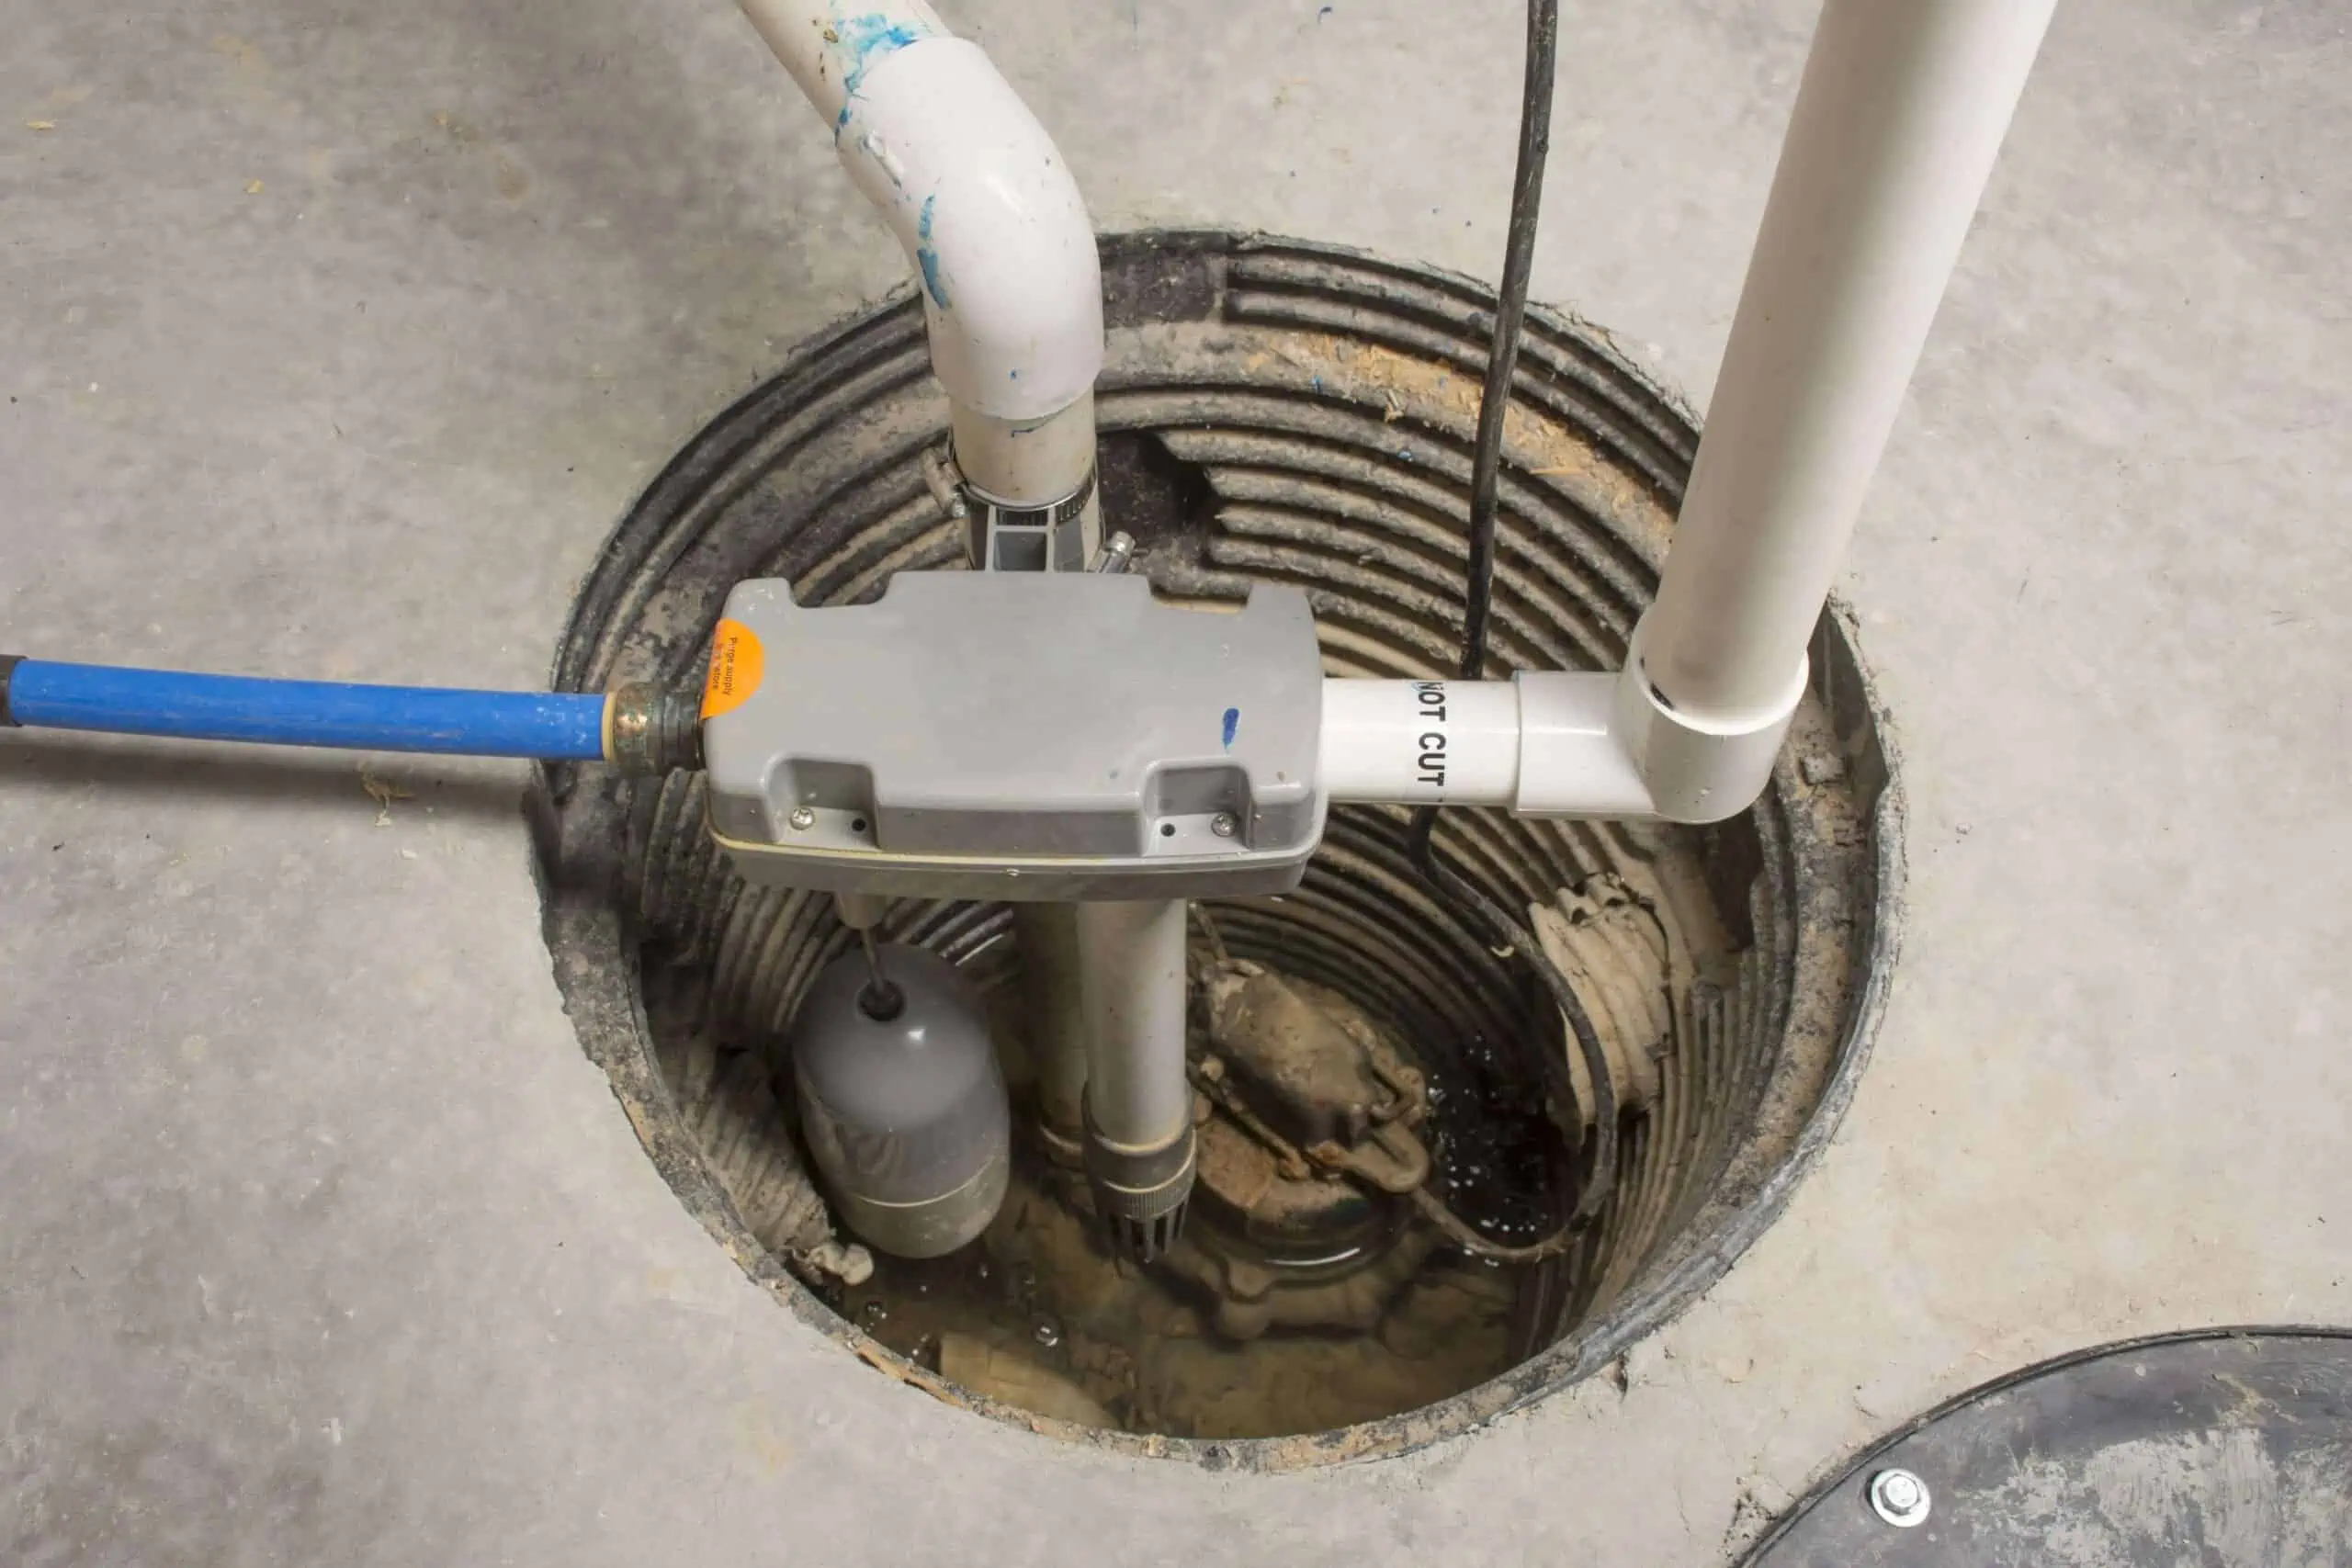 Steps to Inspect and Maintain Your Sump Pump